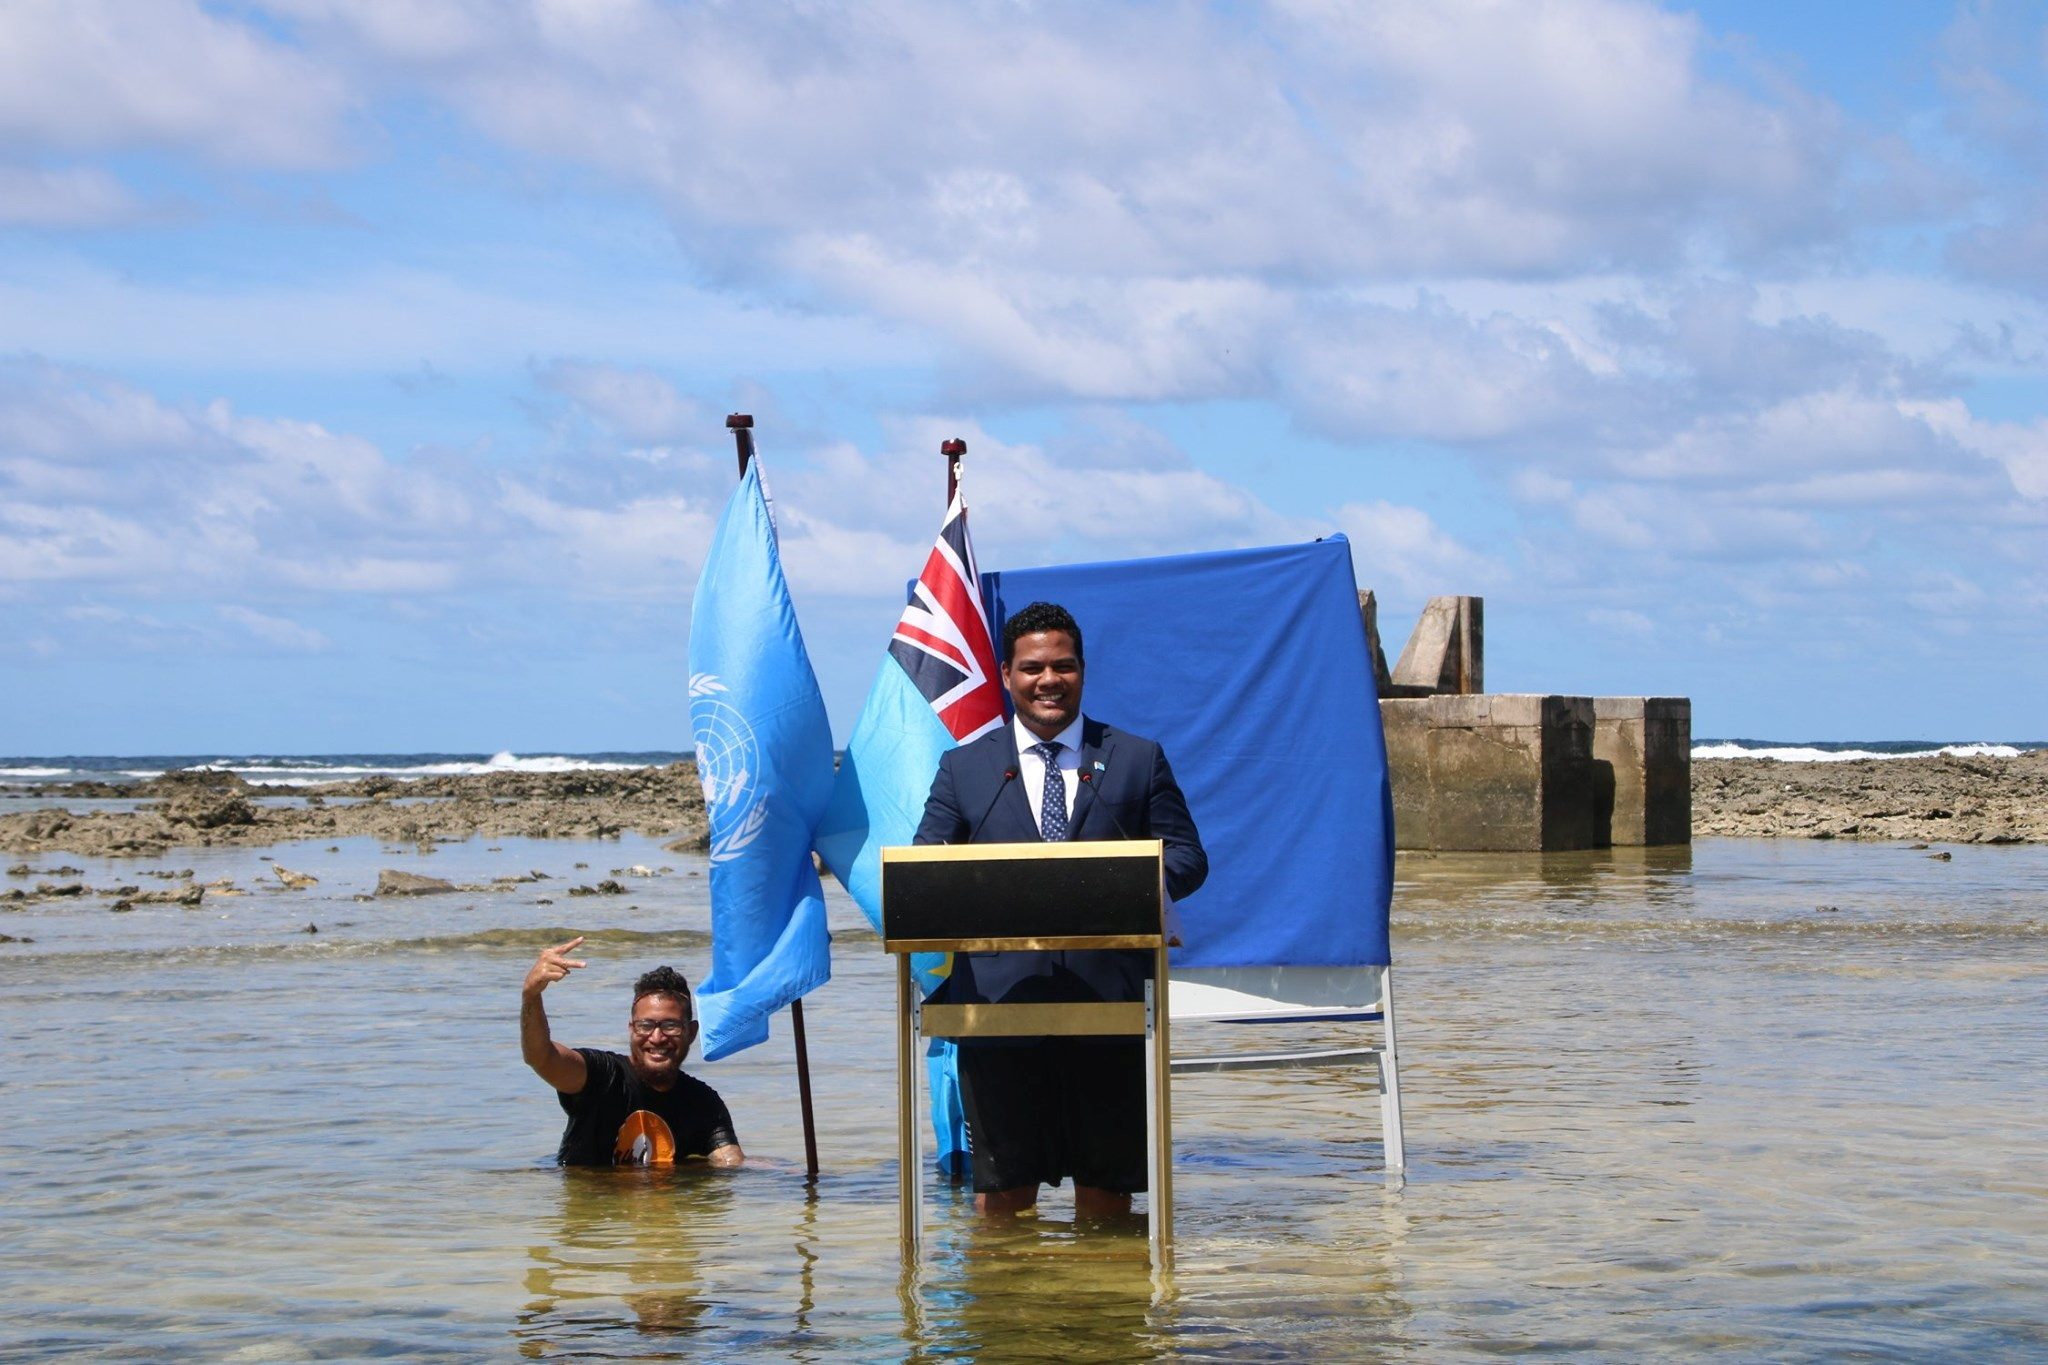 Sinking Tuvalu laments watered-down UN Glasgow climate pact